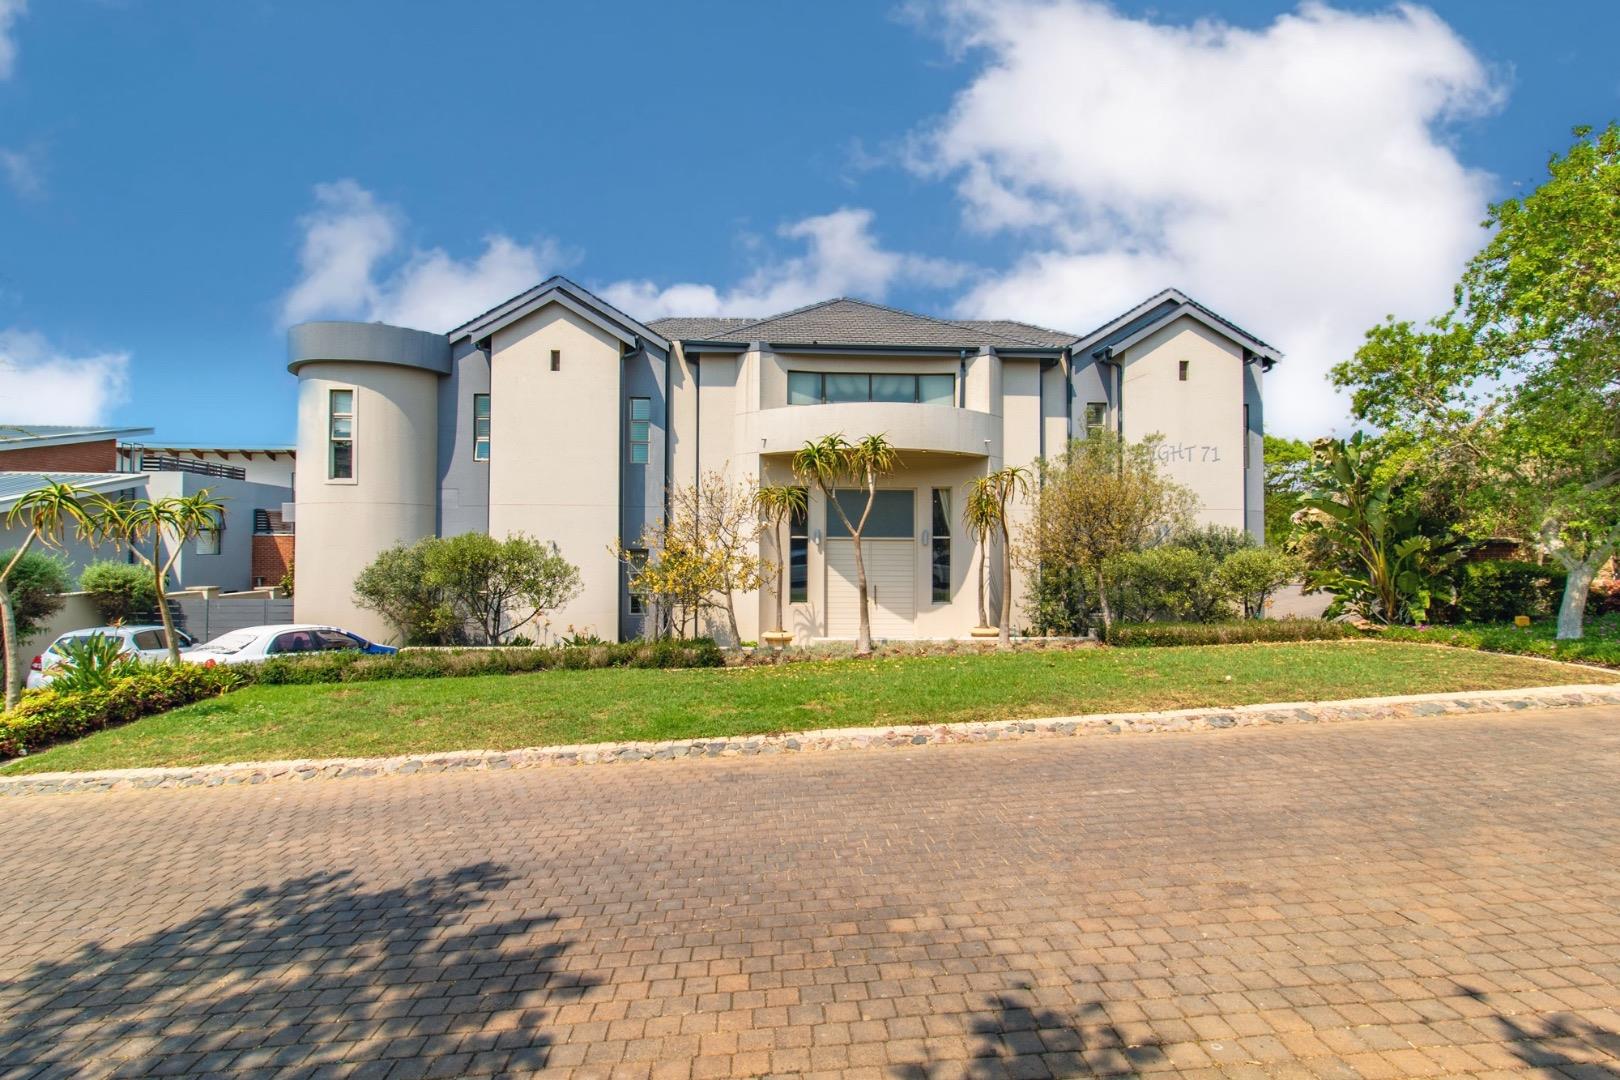 5 Bedroom Luxurious Mansion On A Greenbelt For Sale In Waterfall Country Estate